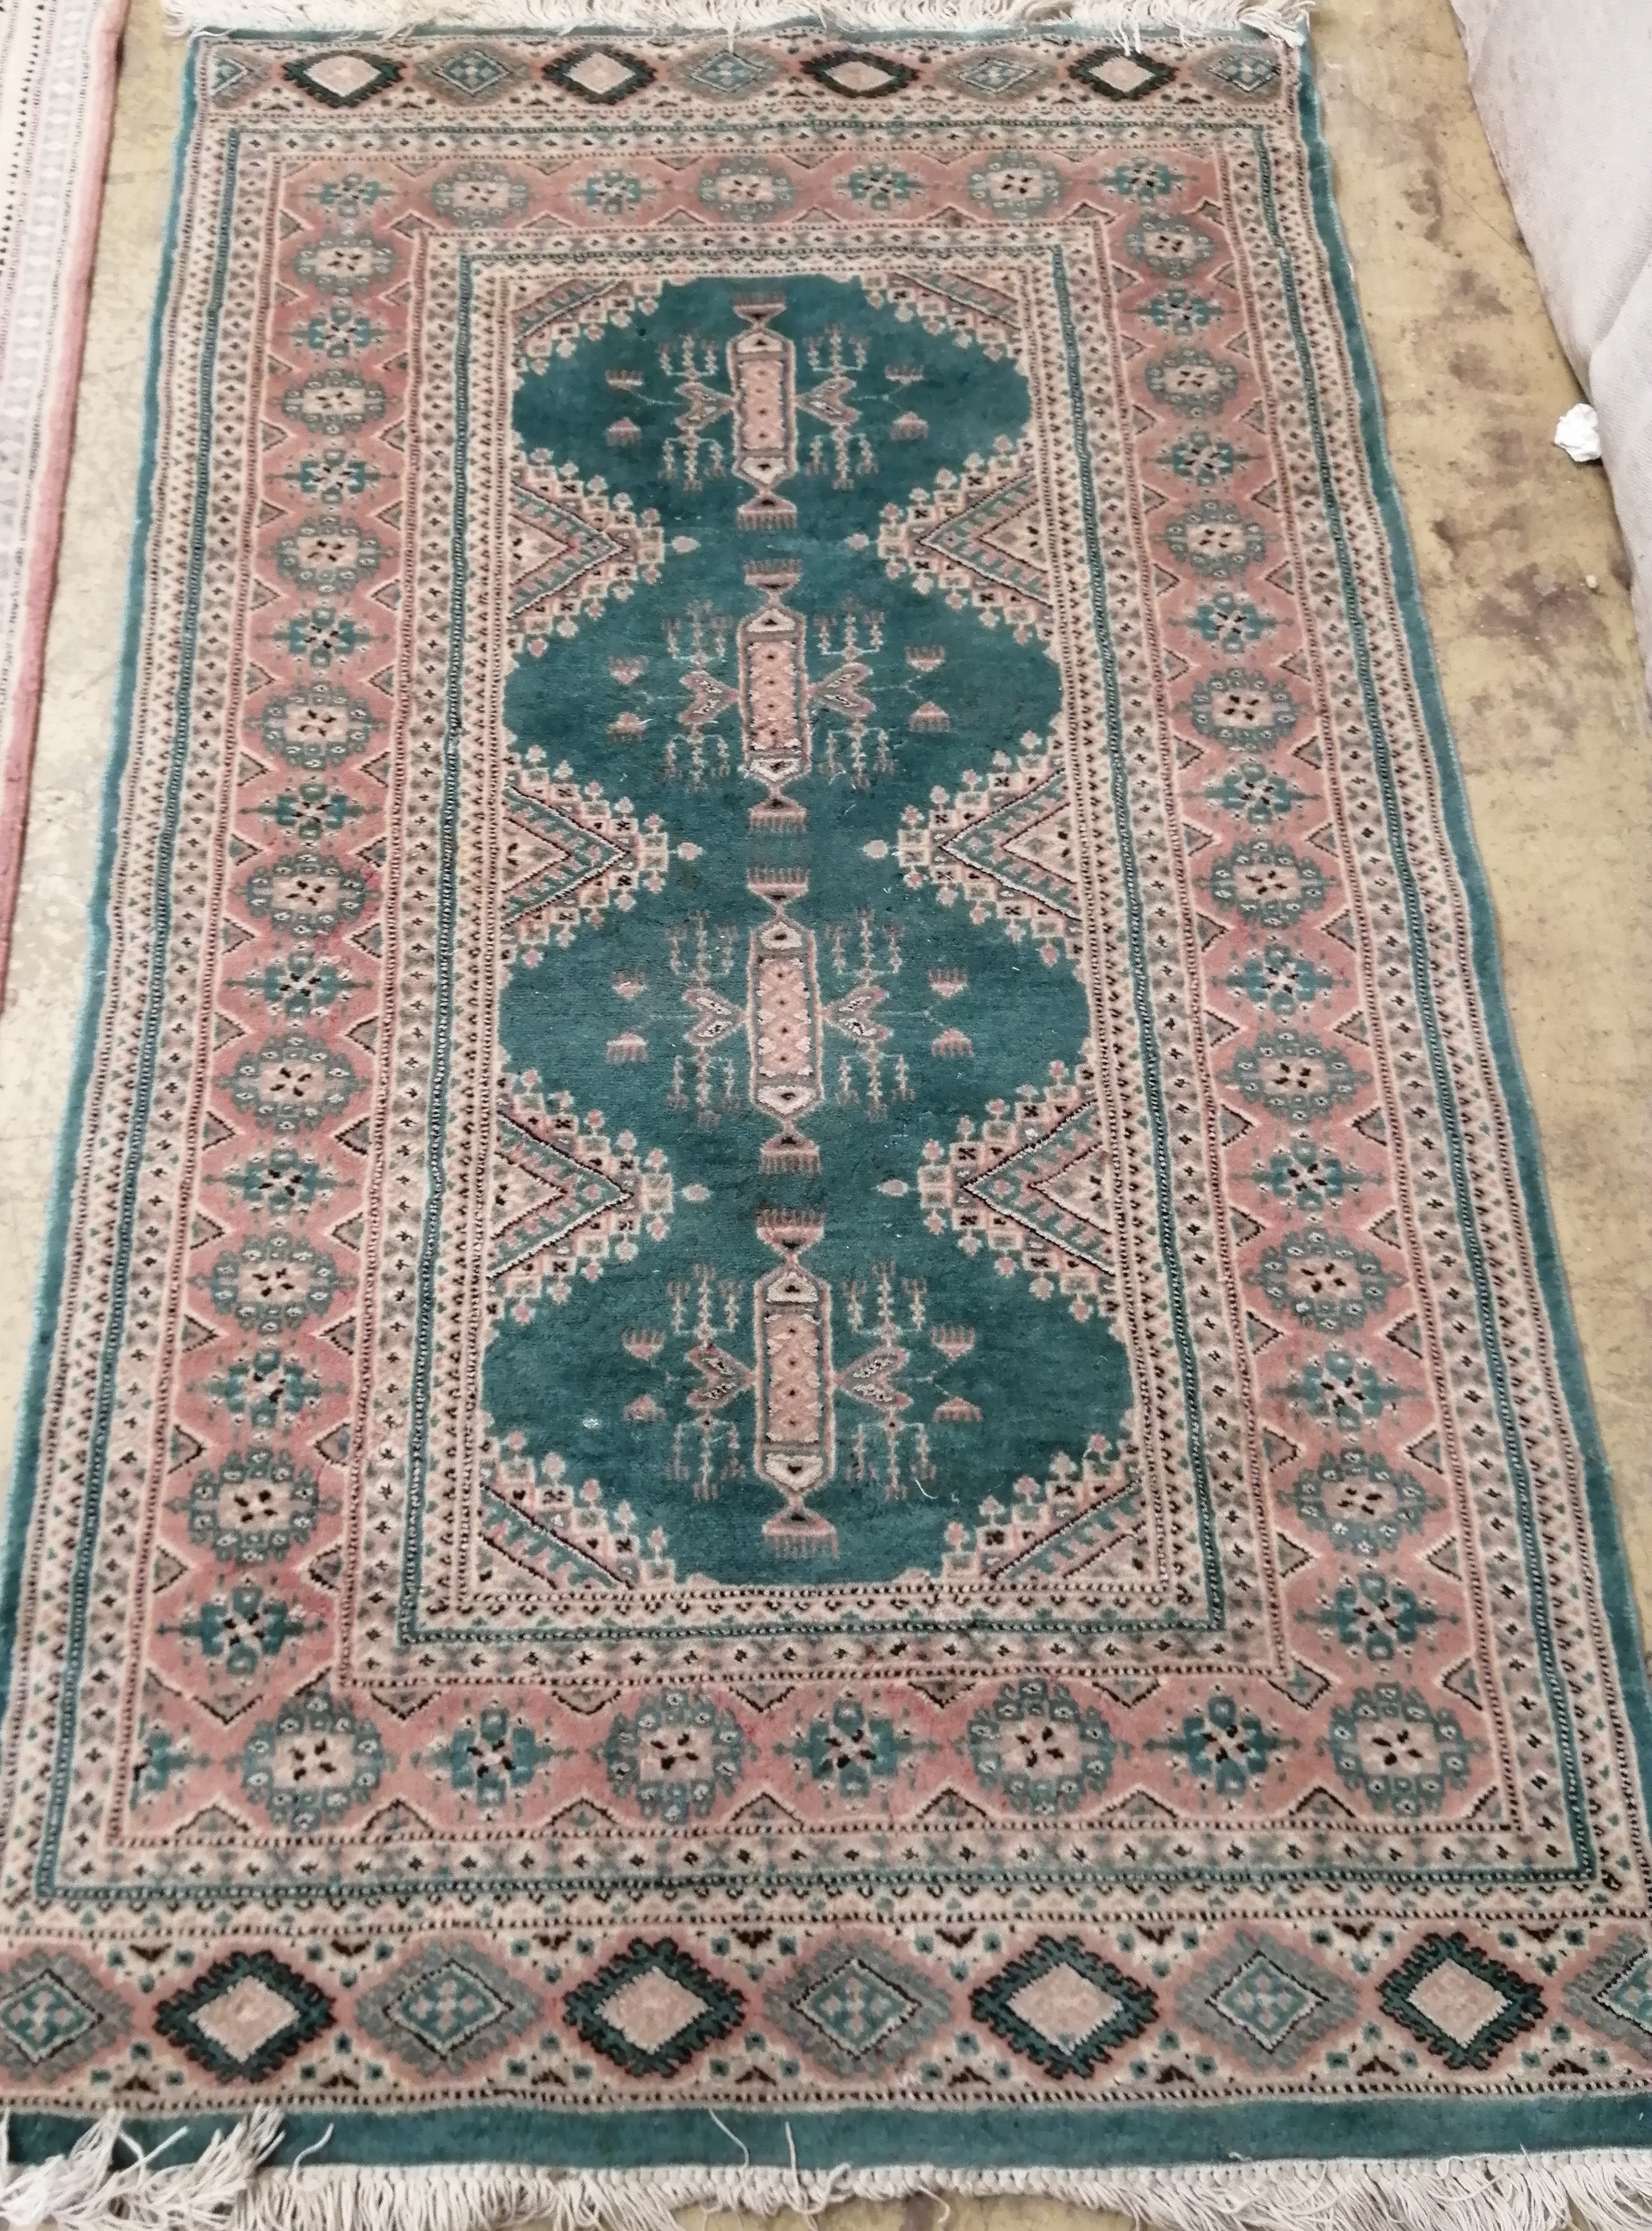 Three North West Persian design runners and rugs, largest 306 x 80cm - Image 4 of 6